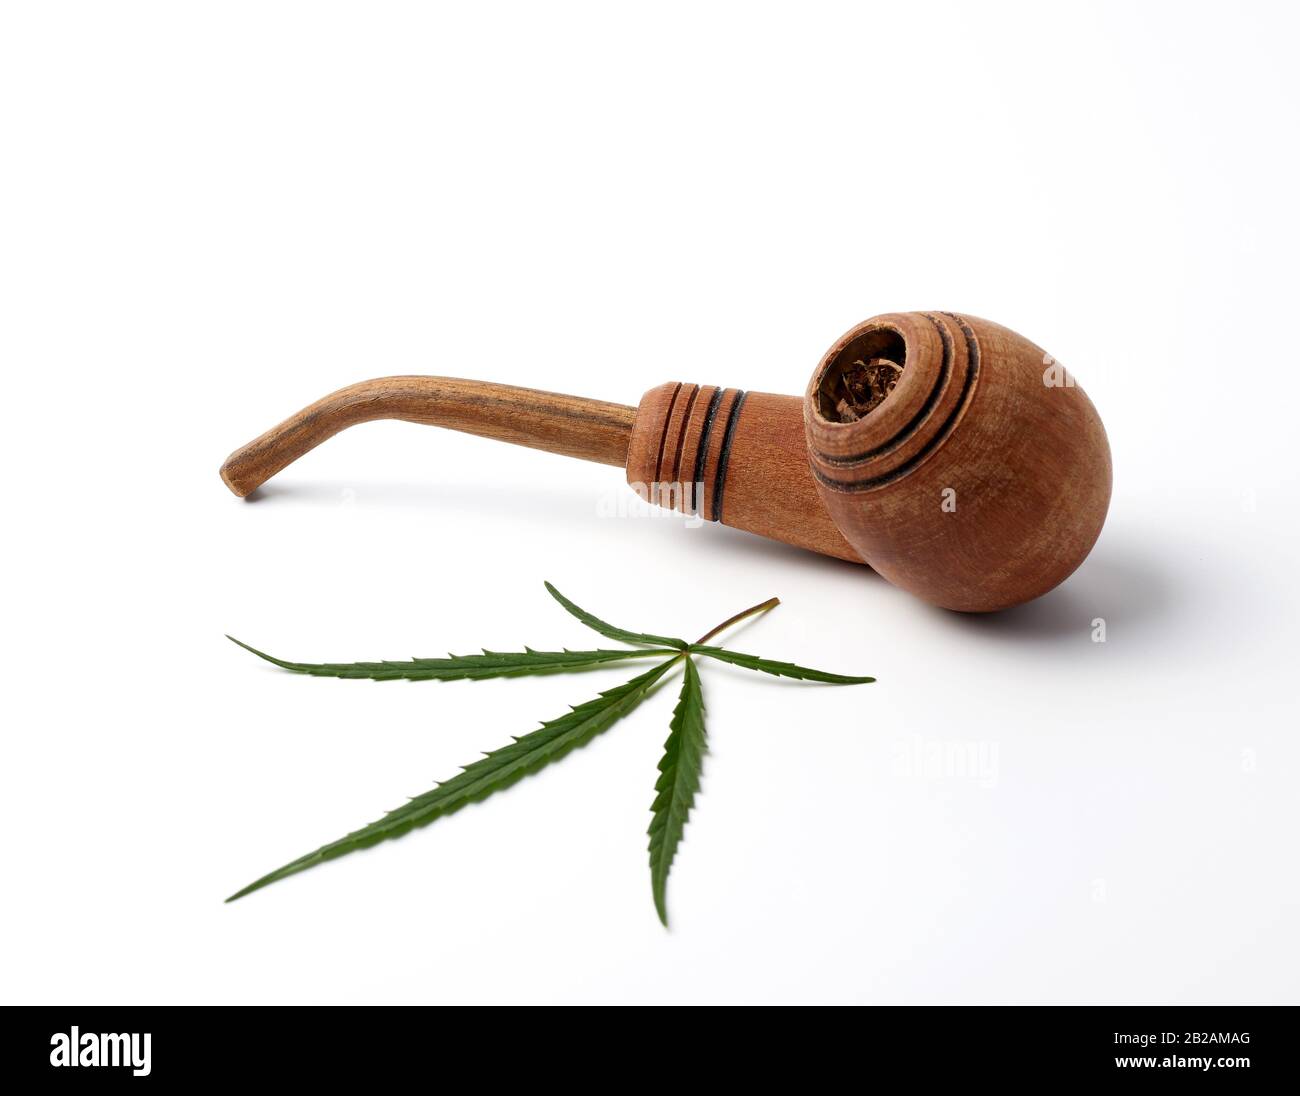 wooden smoking pipe and green hemp leaves on a white background